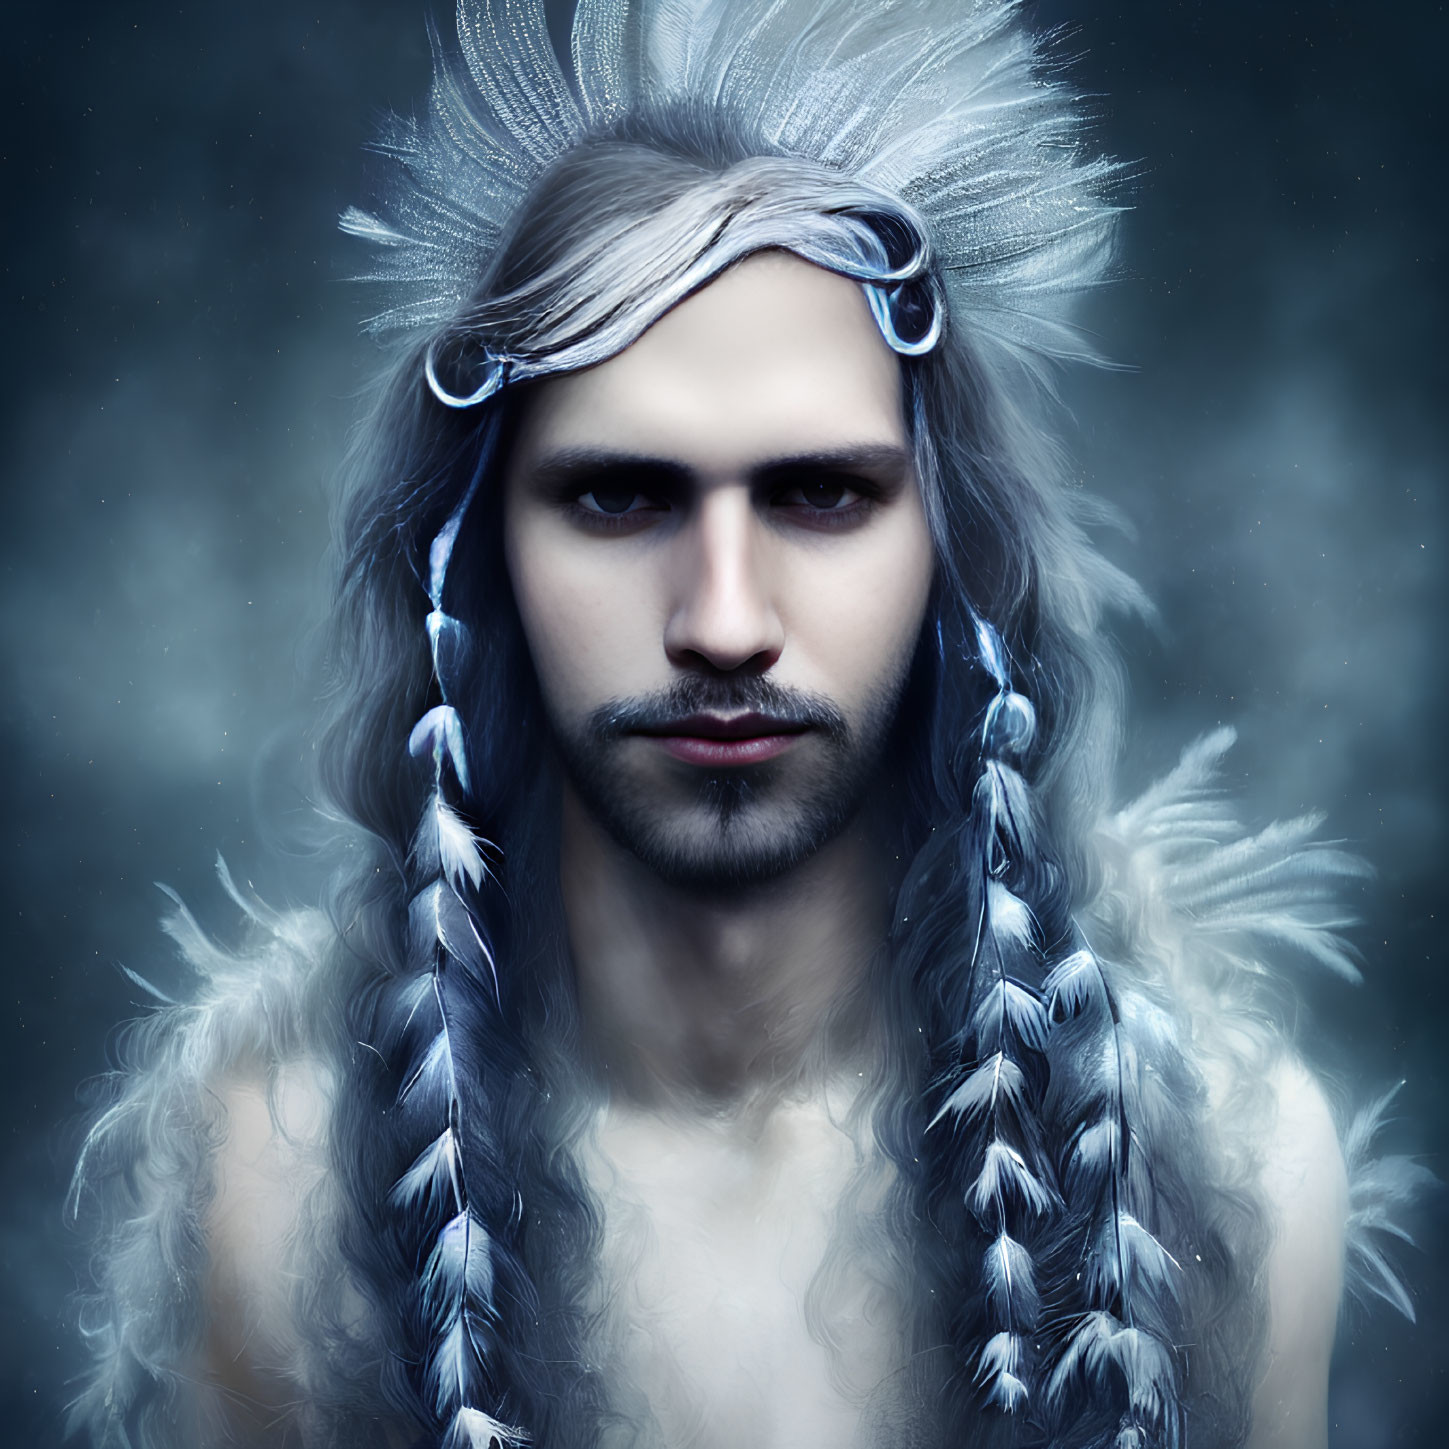 Intense individual with braided hair in feathered headdress in mystical setting